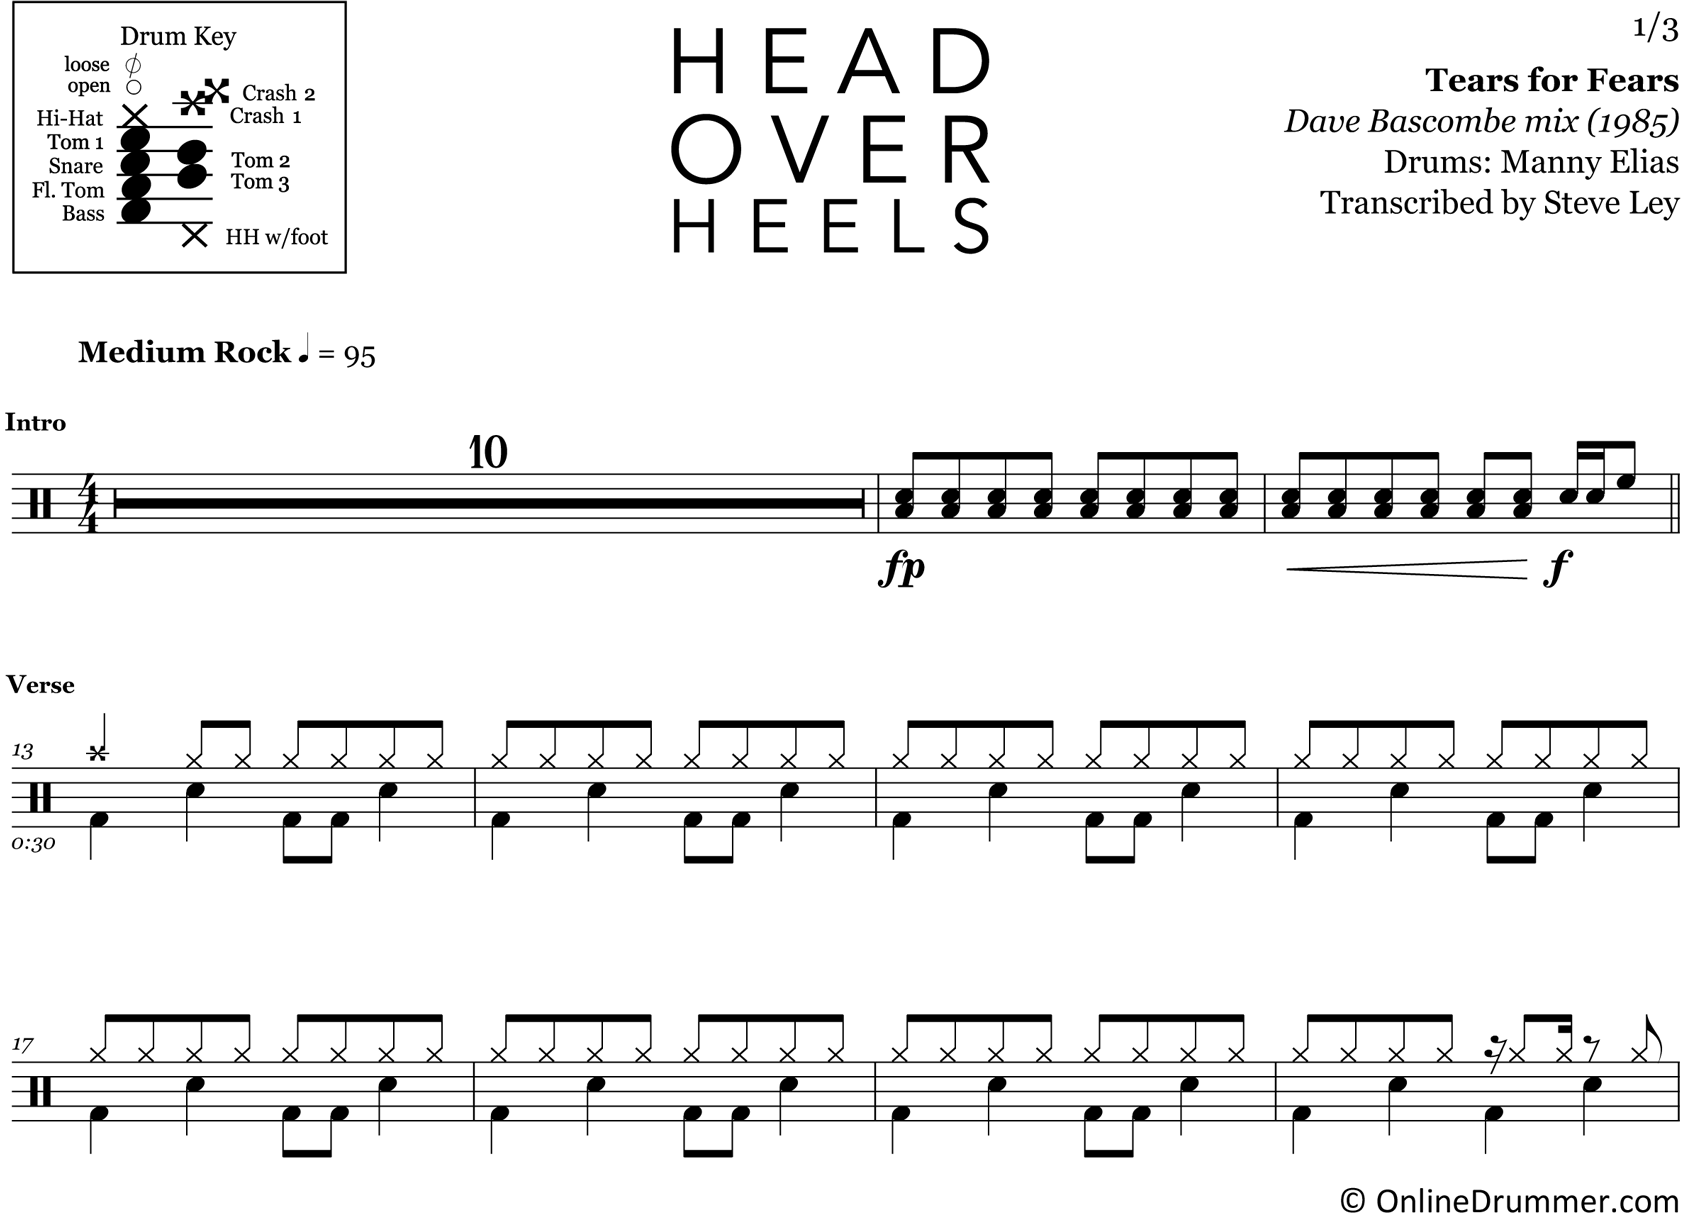 Head Over Heels - Tears For Fears - Drum Sheet Music